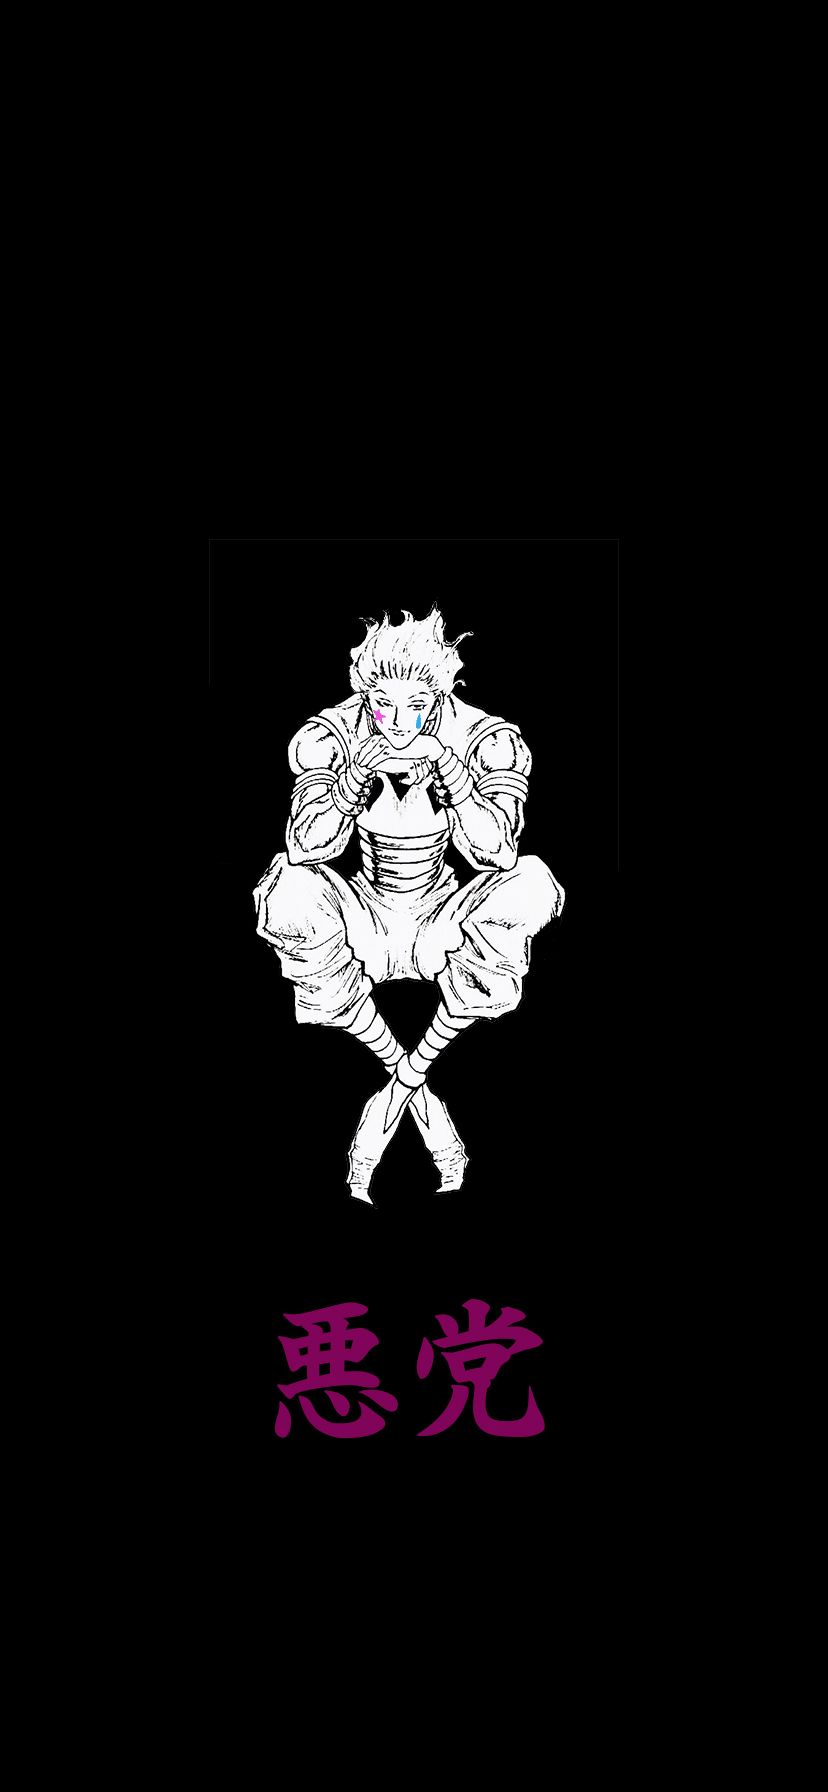 Featured image of post Hisoka Wallpaper Aesthetic if u seen this comment aestheticwallpaper for a shoutout